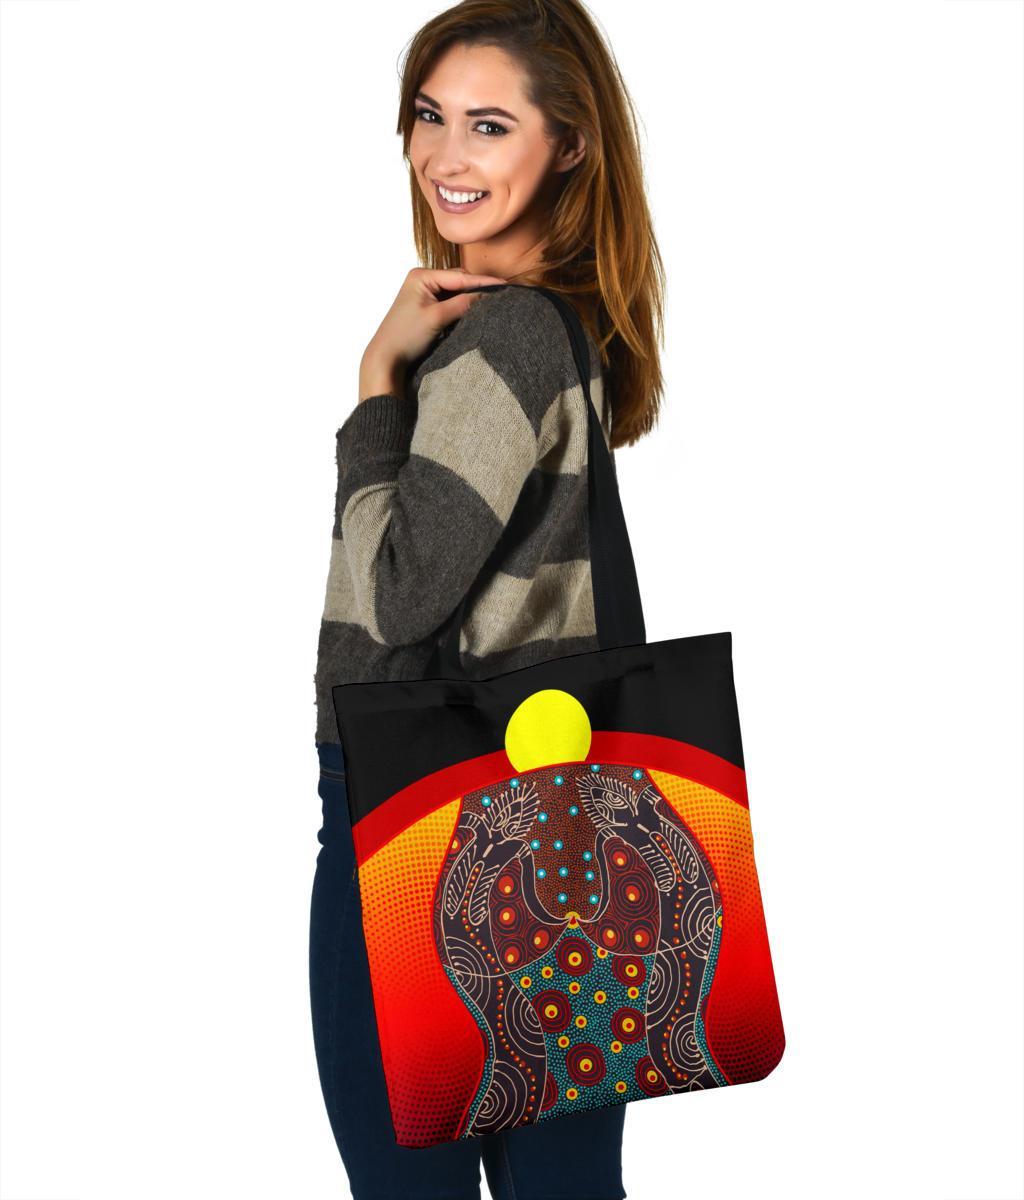 tote-bag-aboriginal-sublimation-dot-pattern-style-red